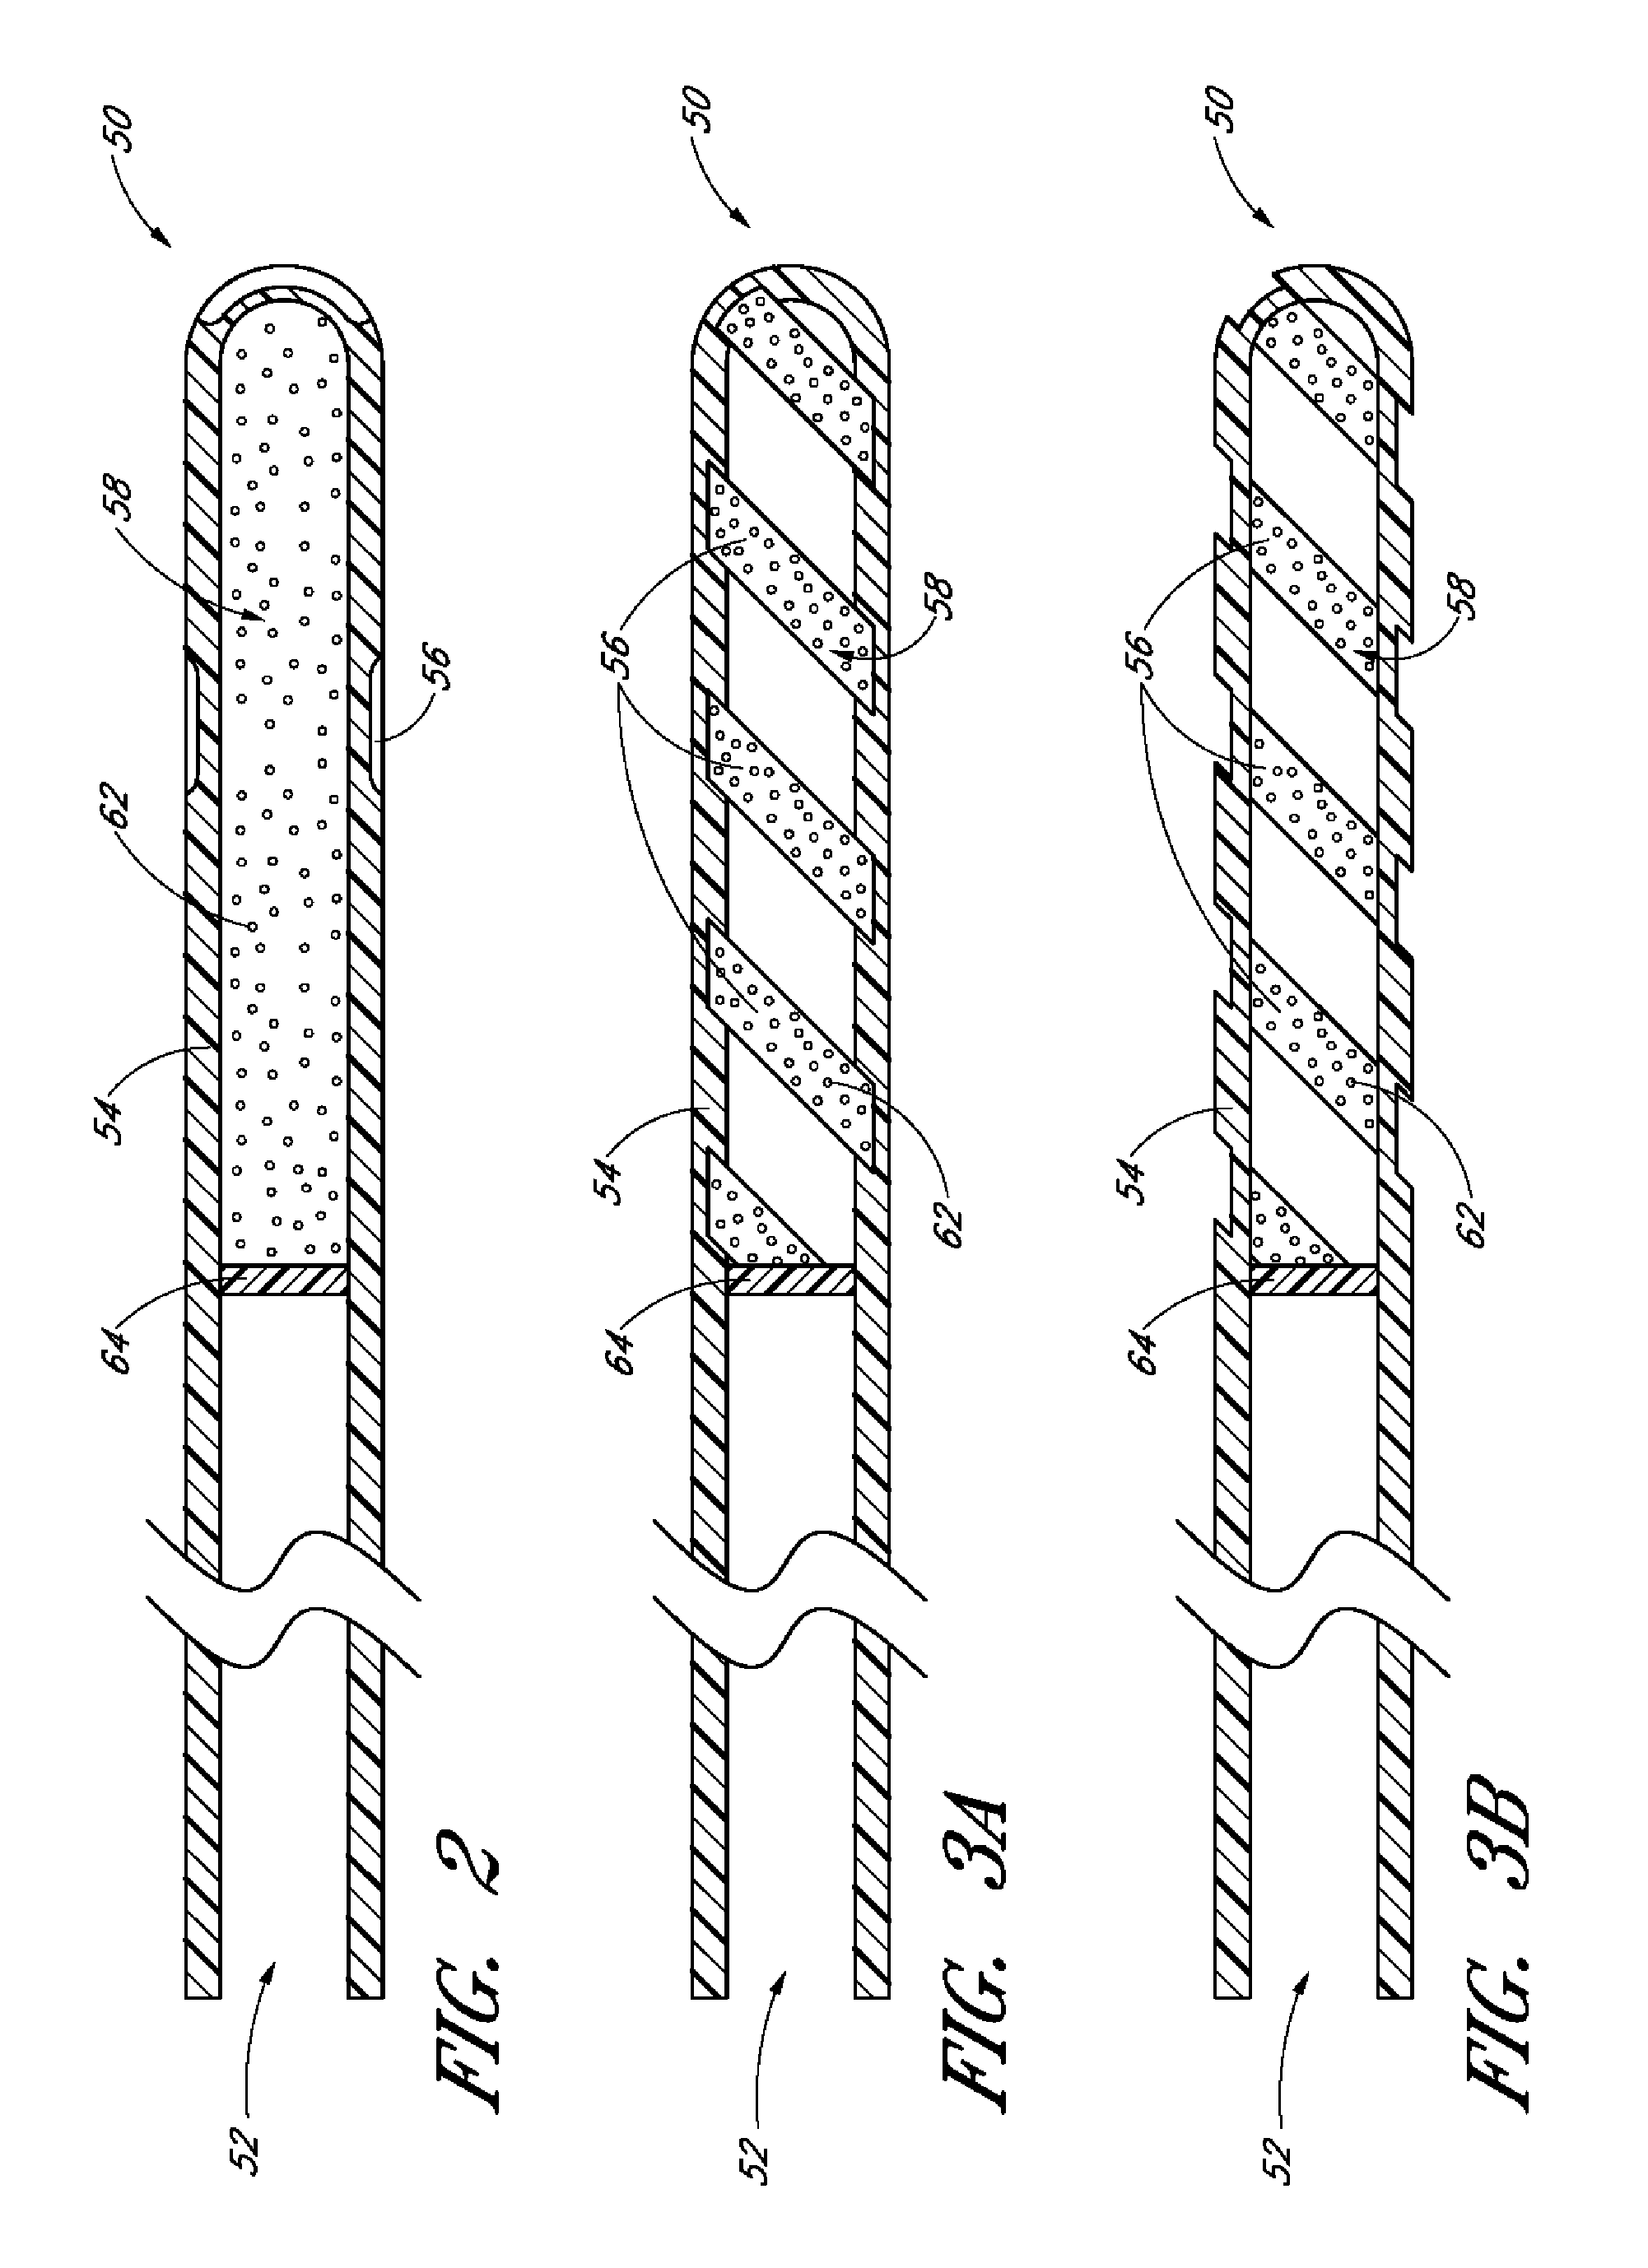 Implants with controlled drug delivery features and methods of using same